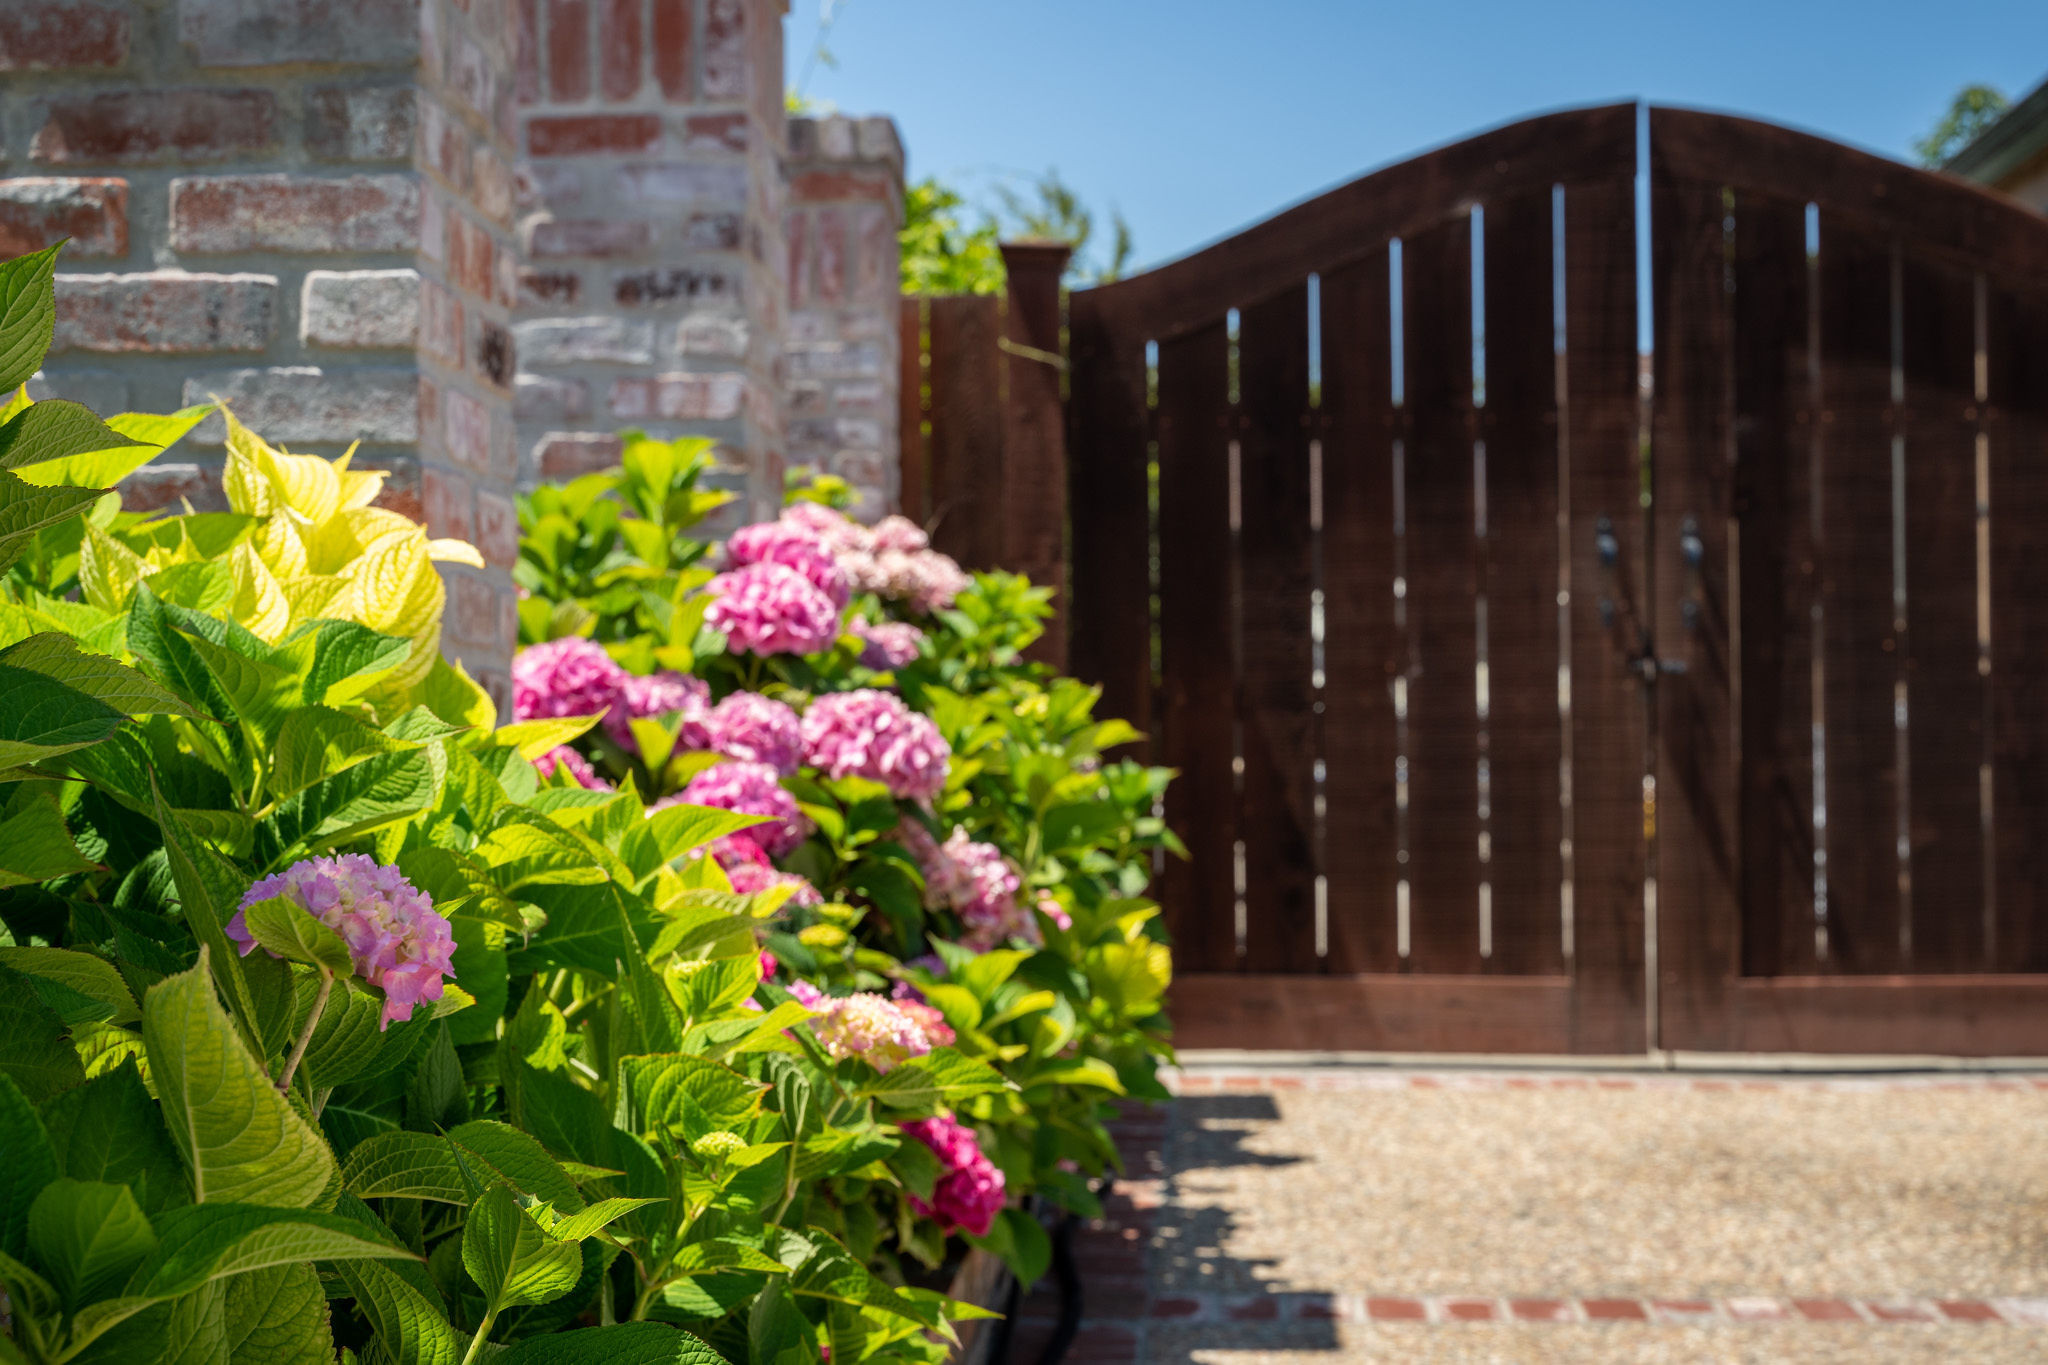 Pink flowers beside a brown wooden gate in San Mateo.